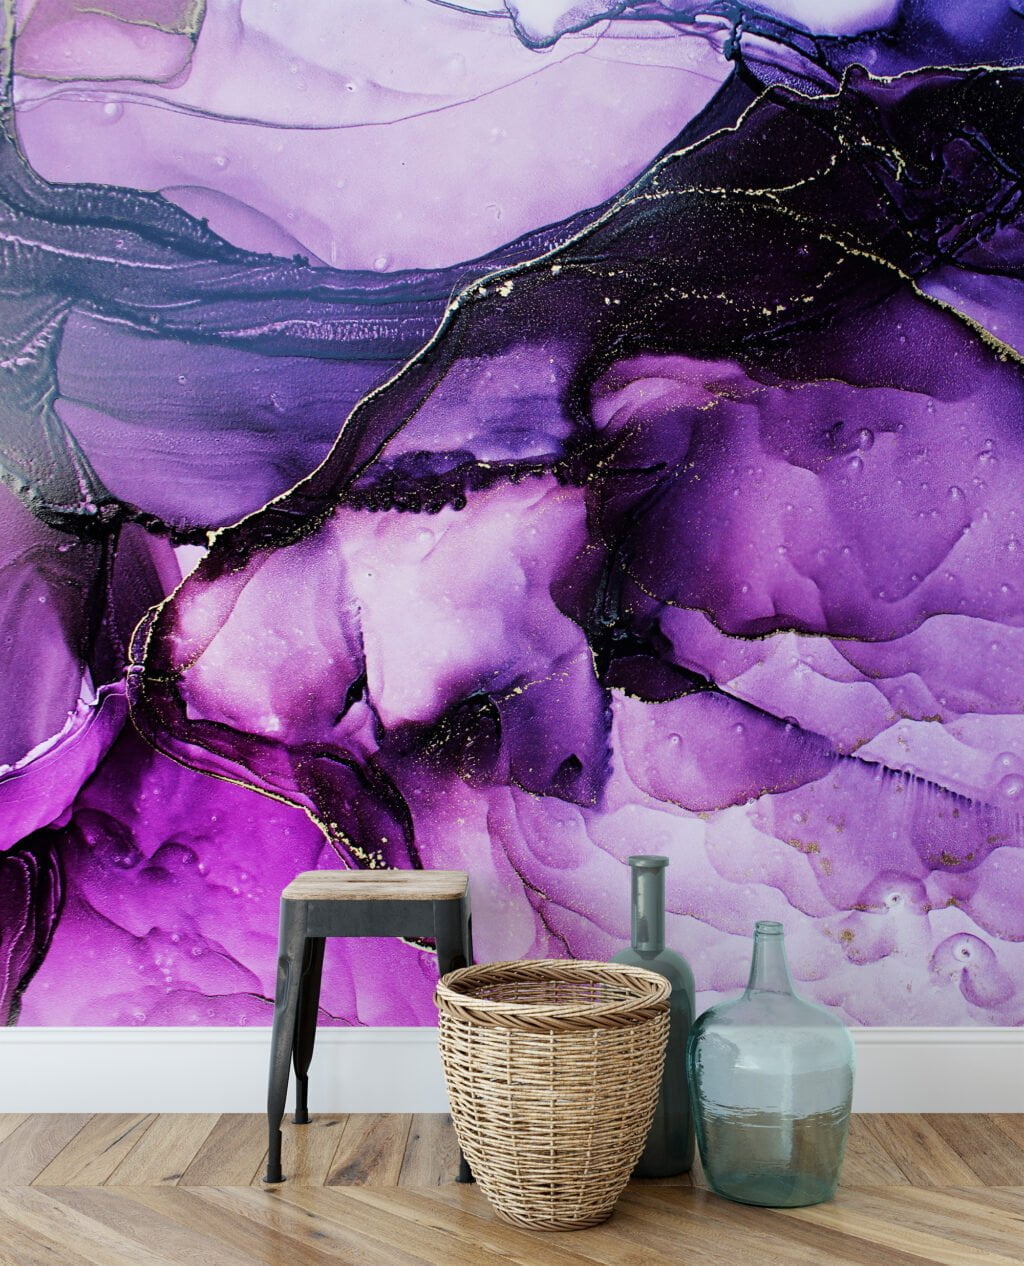 Ethereal and Enchanting Shades of Purple Alcohol Ink Art Wallpaper for a Mesmerizing and Artistic Home Ambience